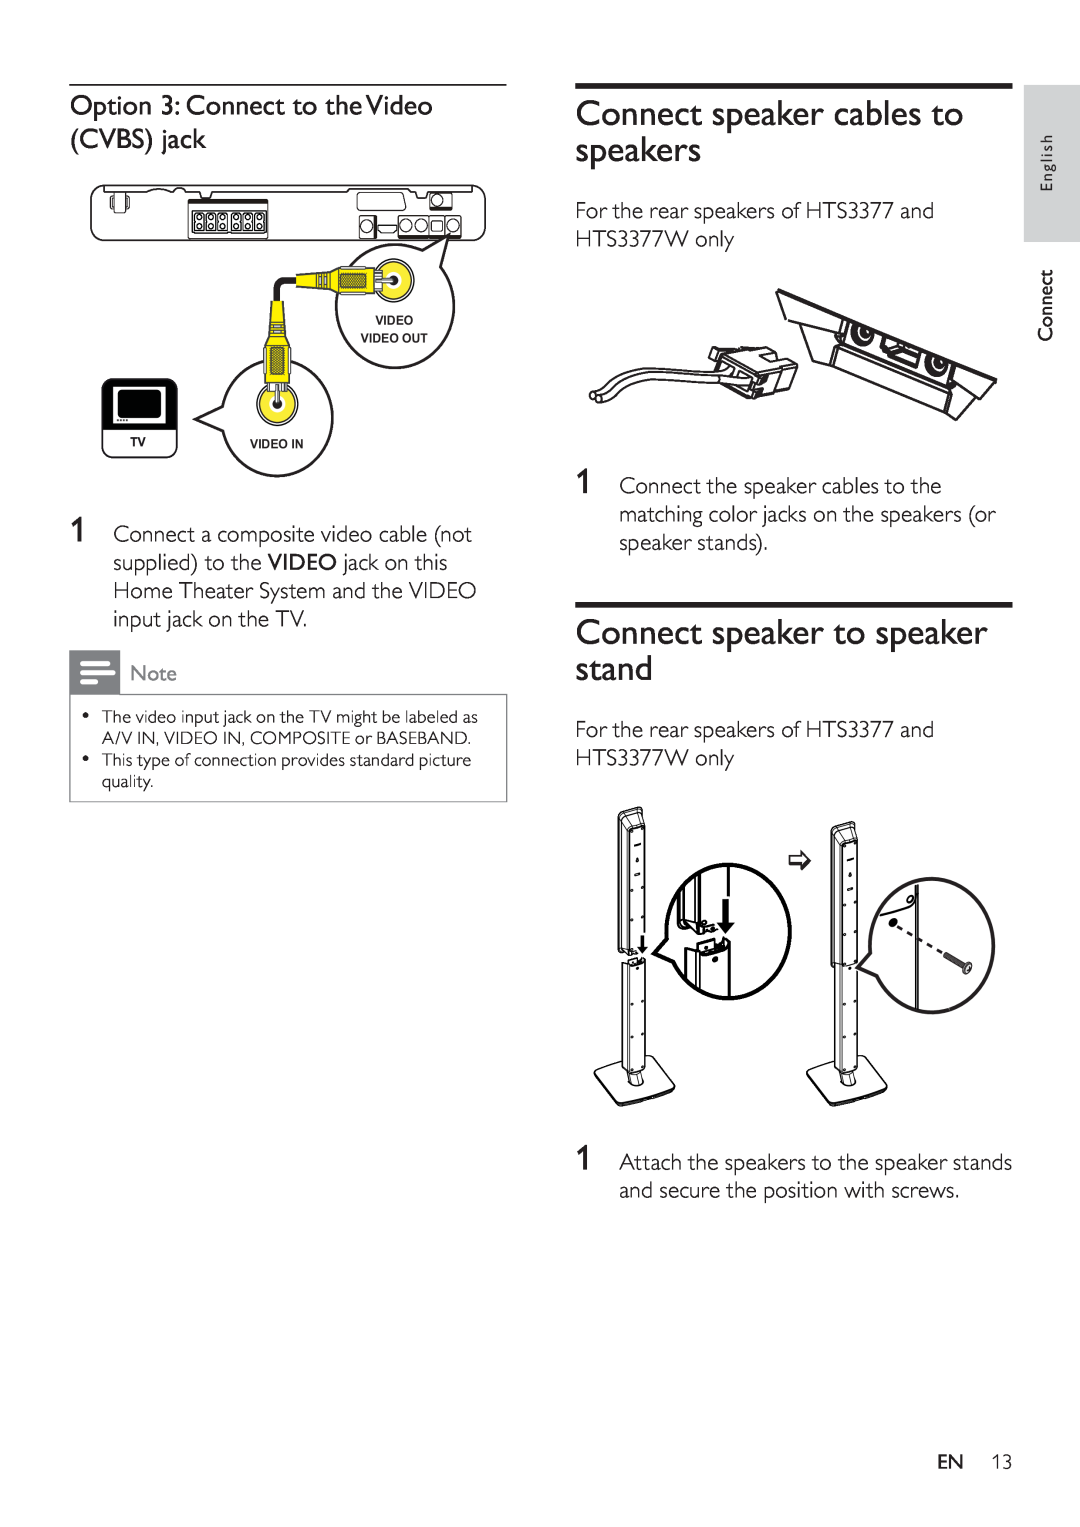 Philips HTS3377W, HTS3270 user manual Connect speaker cables to, speakers, Connect speaker to speaker stand 